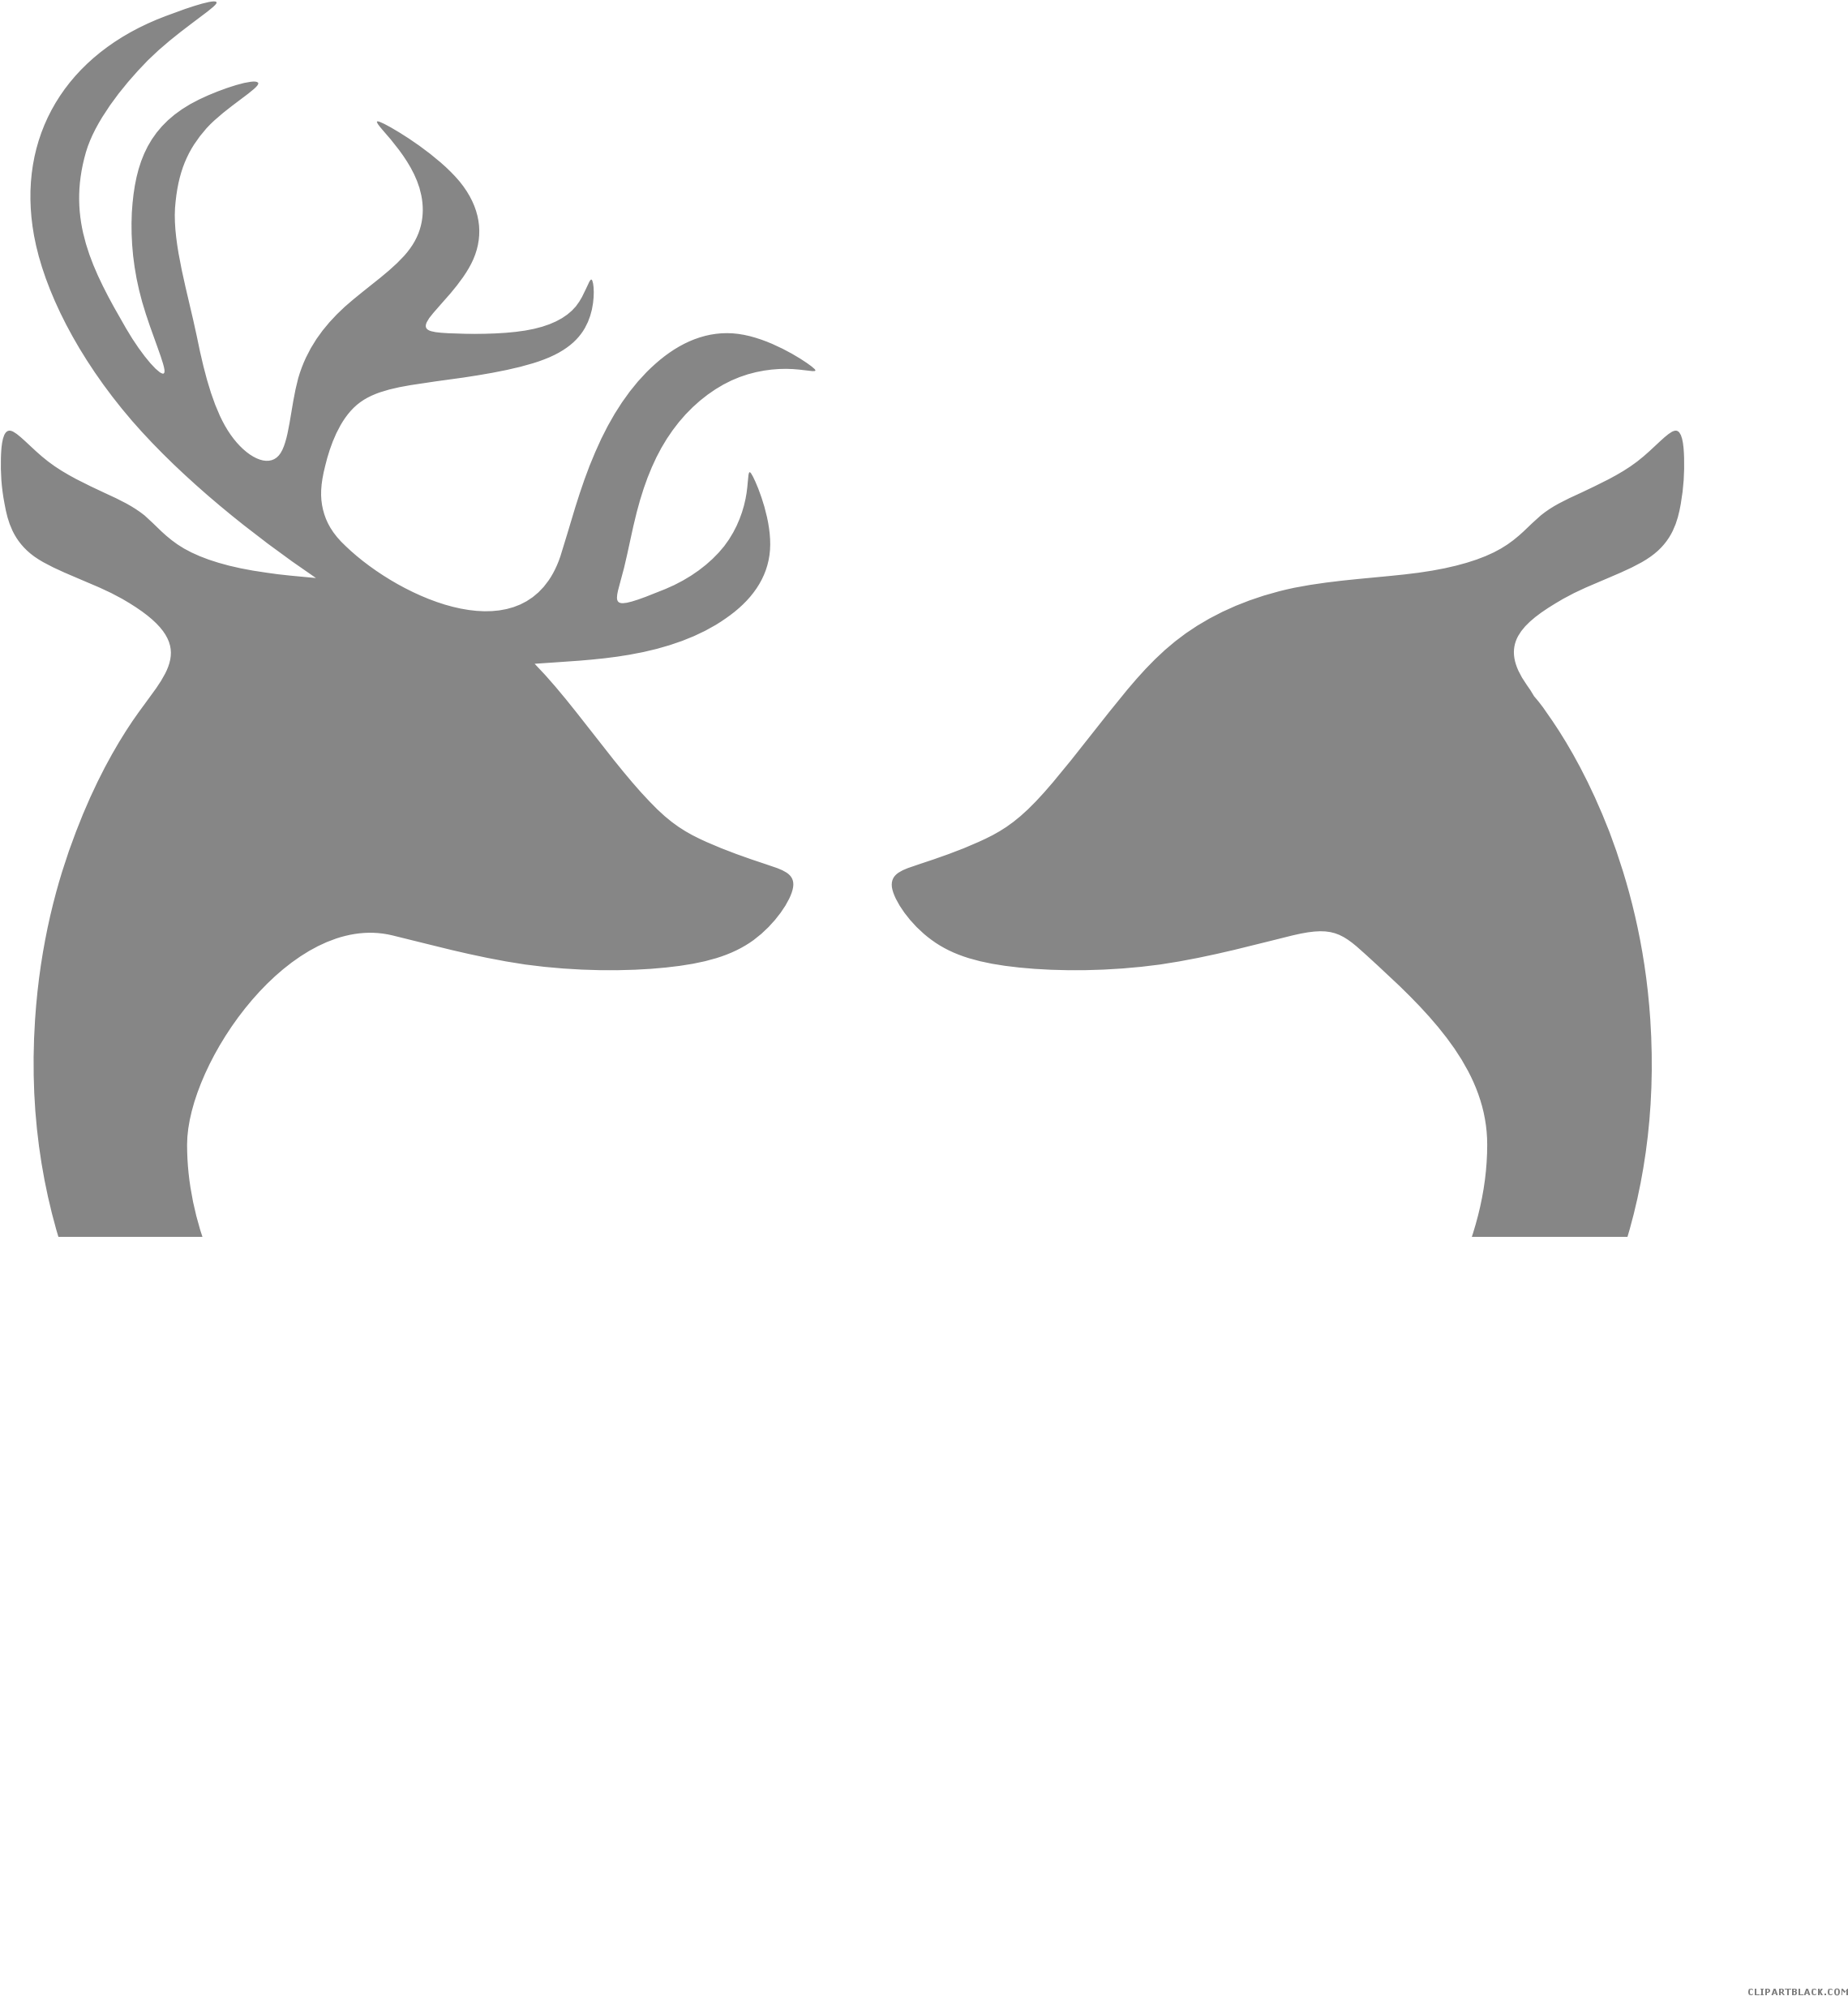 Deer Silhouette Animal Free Black White Clipart Images - Buck And Doe Heart Stencil (2508x2520)